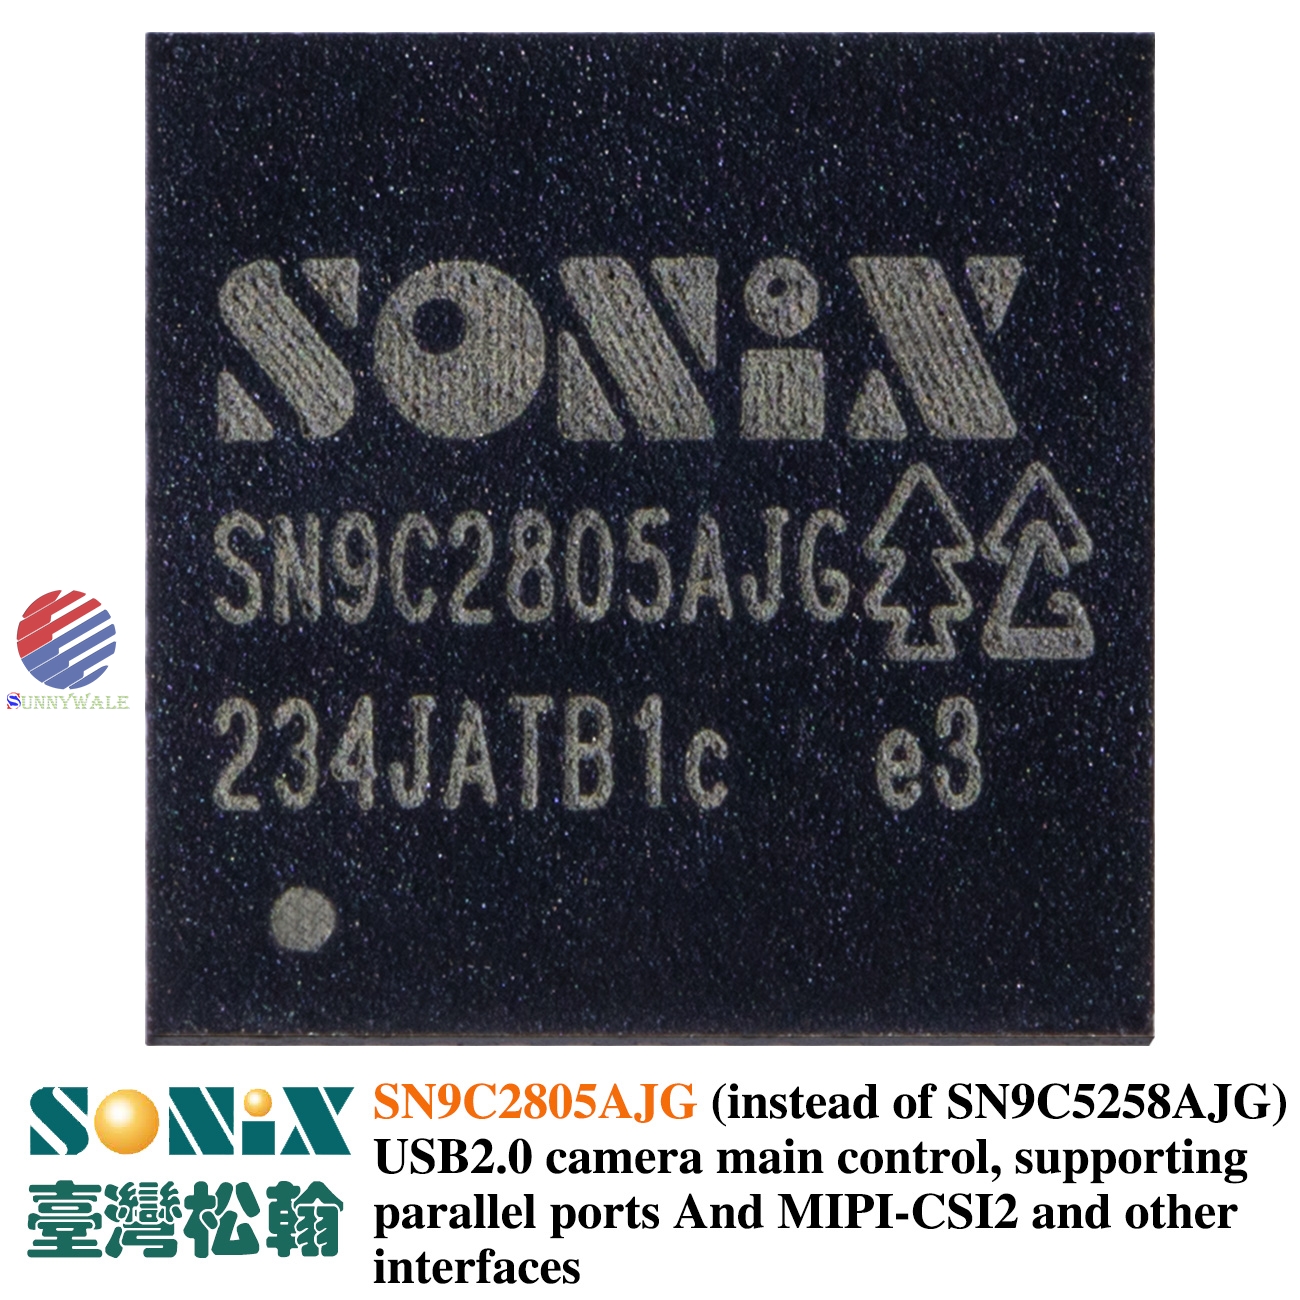 SN9C2805A-002 SONIX USB 2.0 Video PC Camera Controller, supports parallel and MIPI-CSI2 1/2 lane CMOS sensor interface, ISP performance up to 2592x1944@30fps or 1920x1080@60fps, multi-function USB PC camera controller